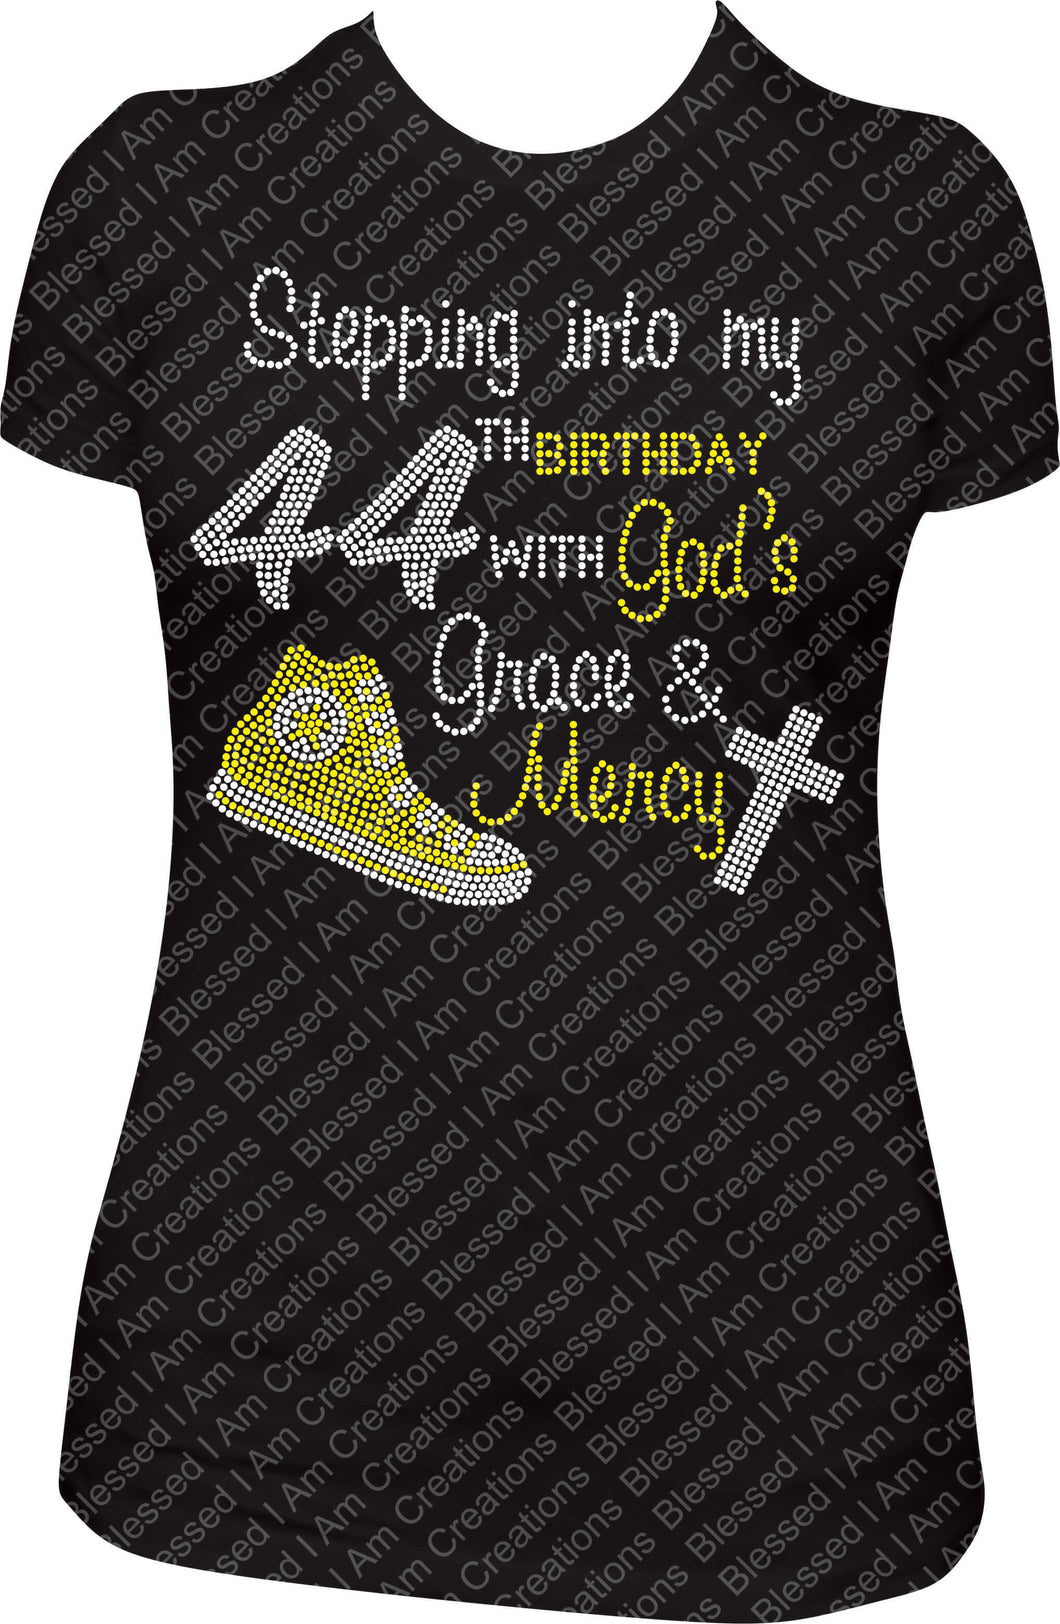 Stepping into my 44th Birthday With God's Grace and Mercy Rhinestone Shirt